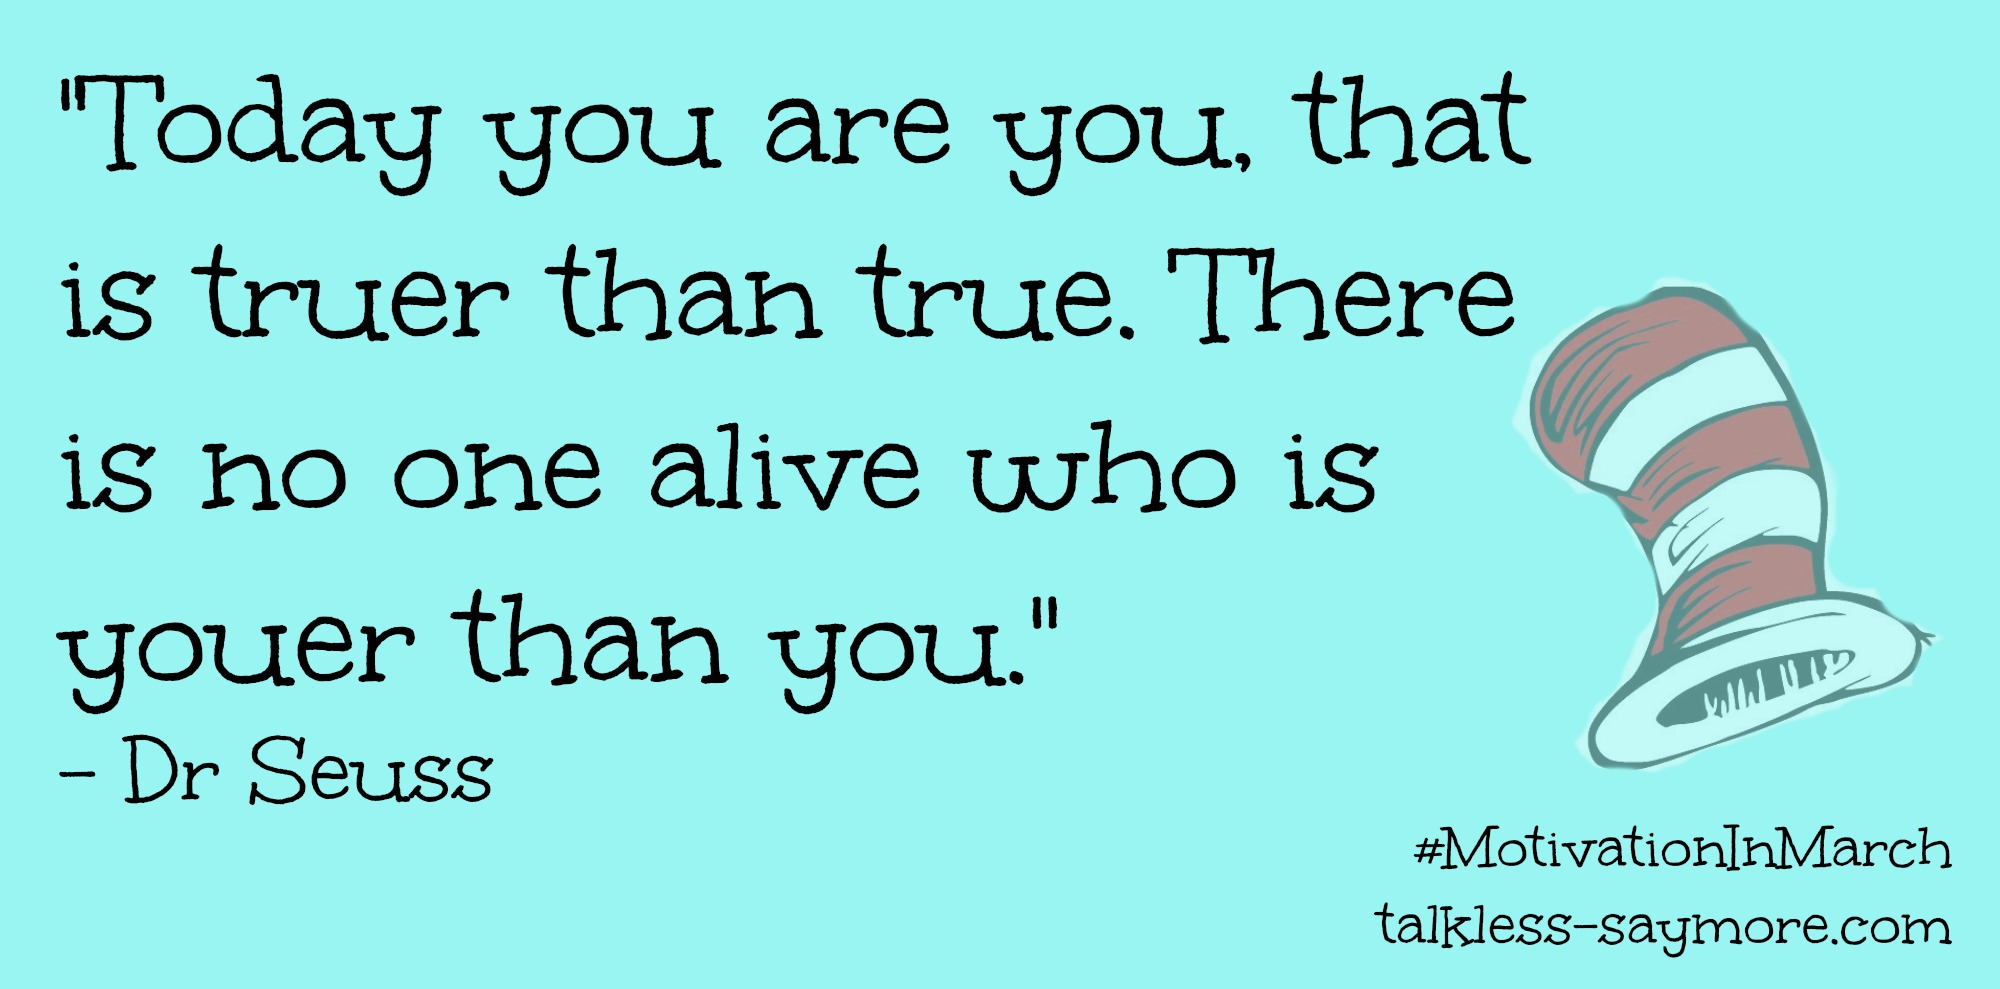 Today you are You, that is truer than true. There is no one alive who is Youer than You. Dr. Seuss